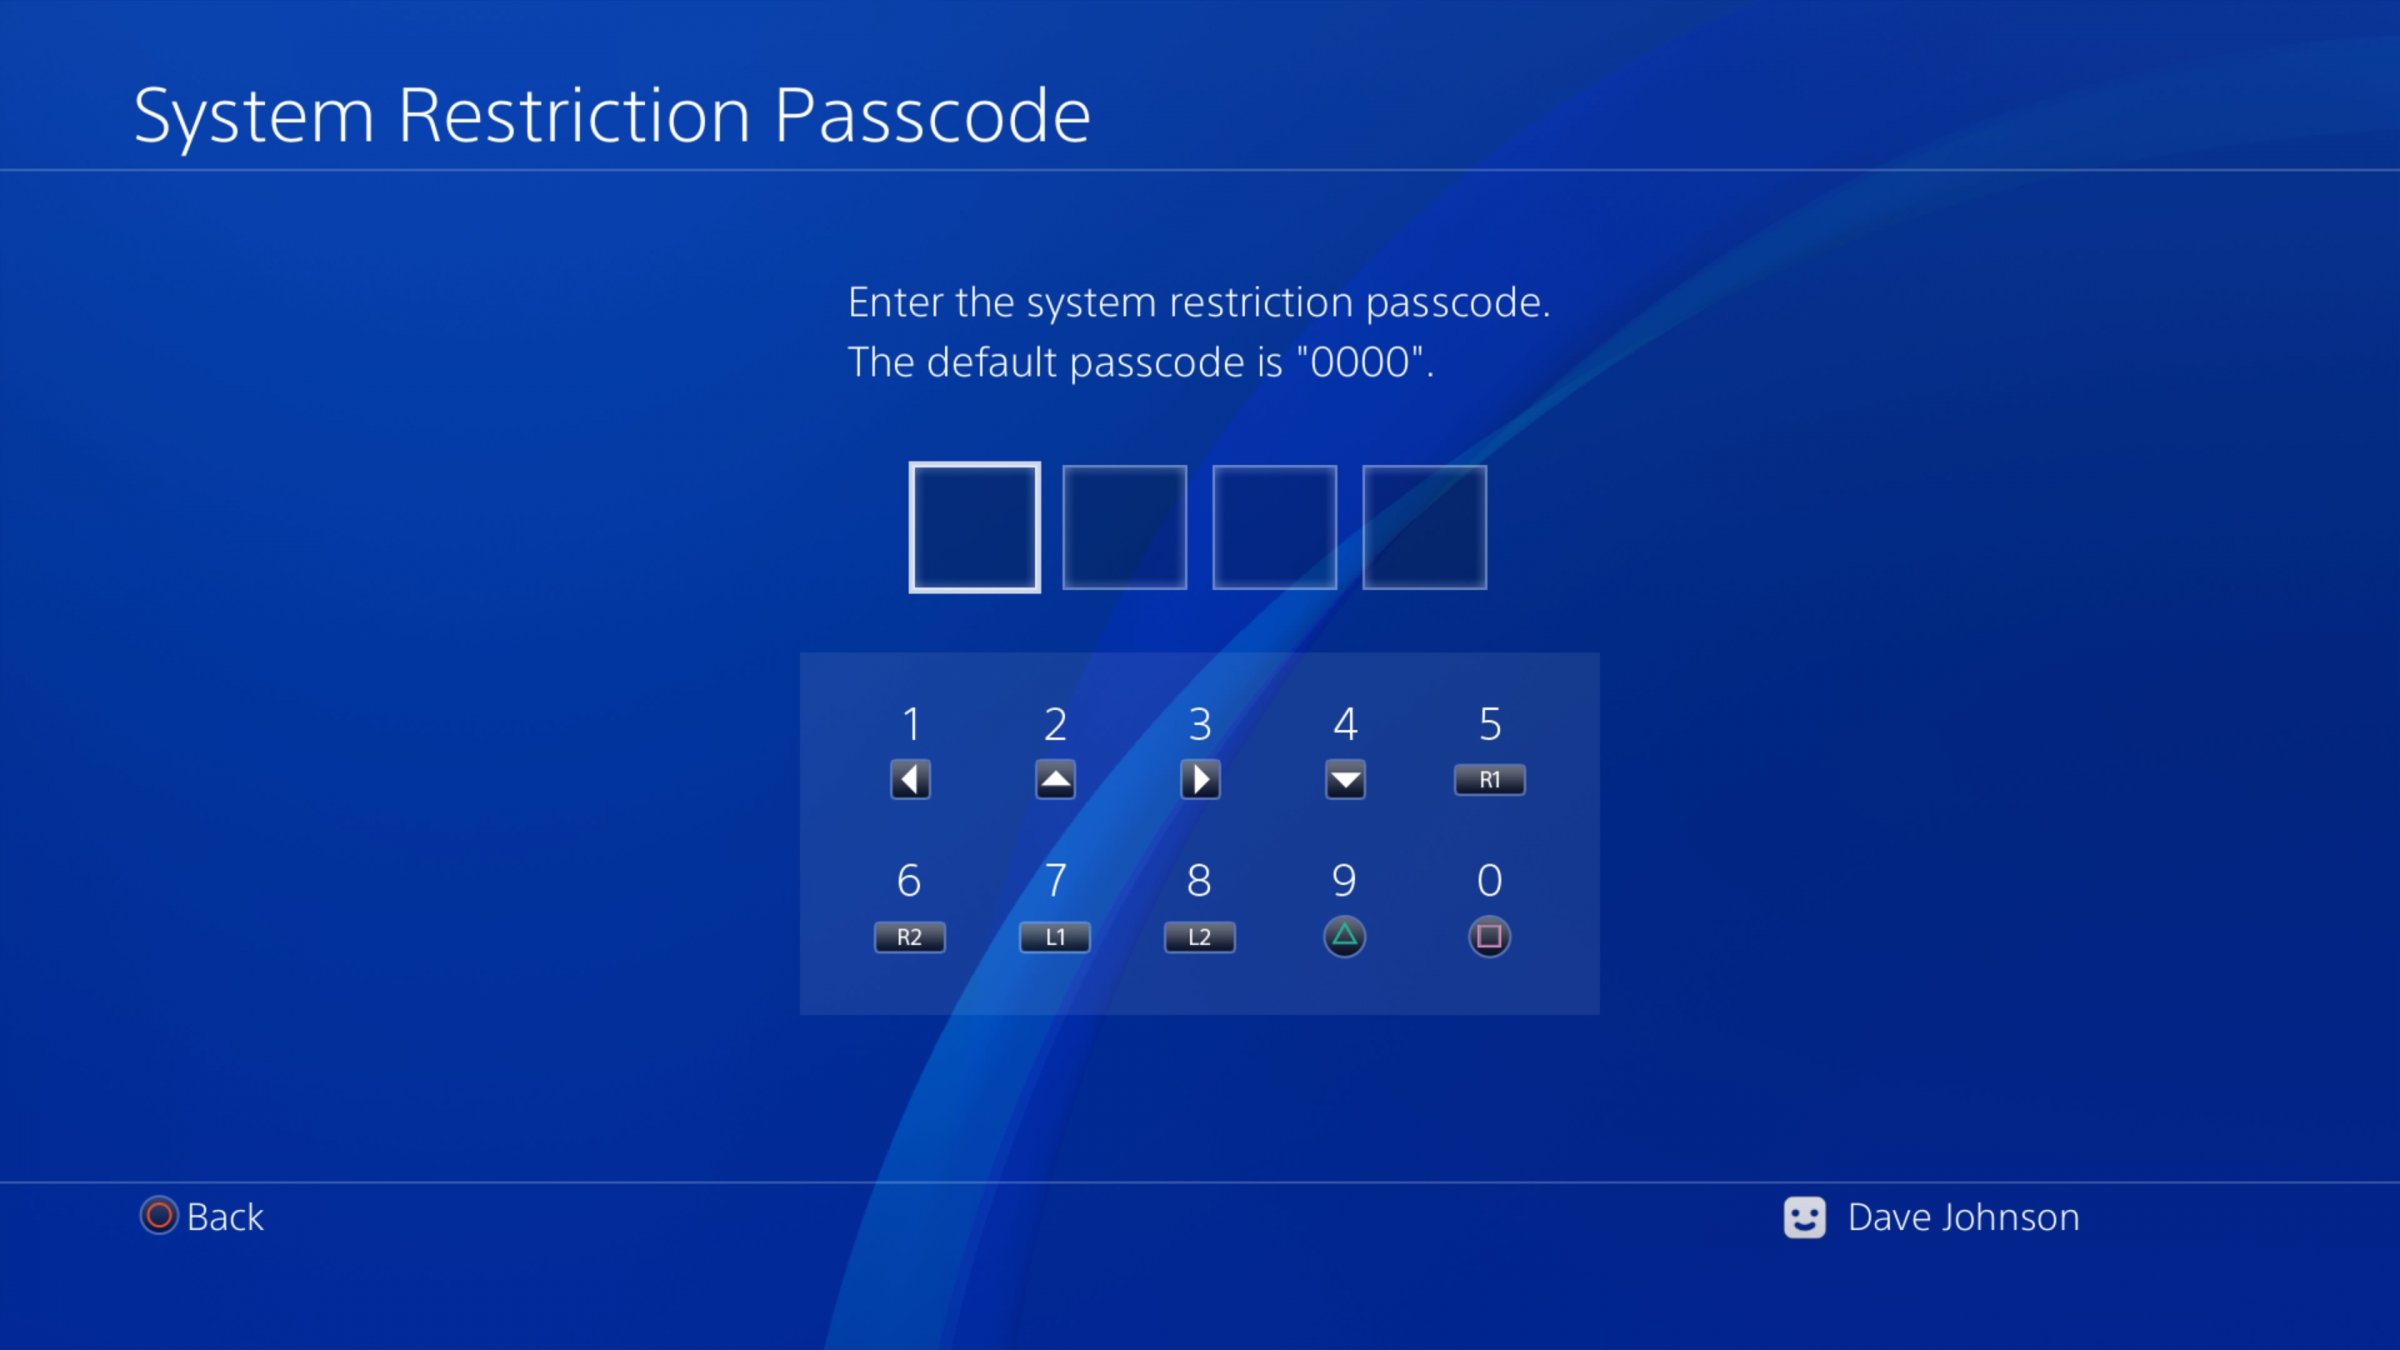 How to turn off parental controls on a PS4